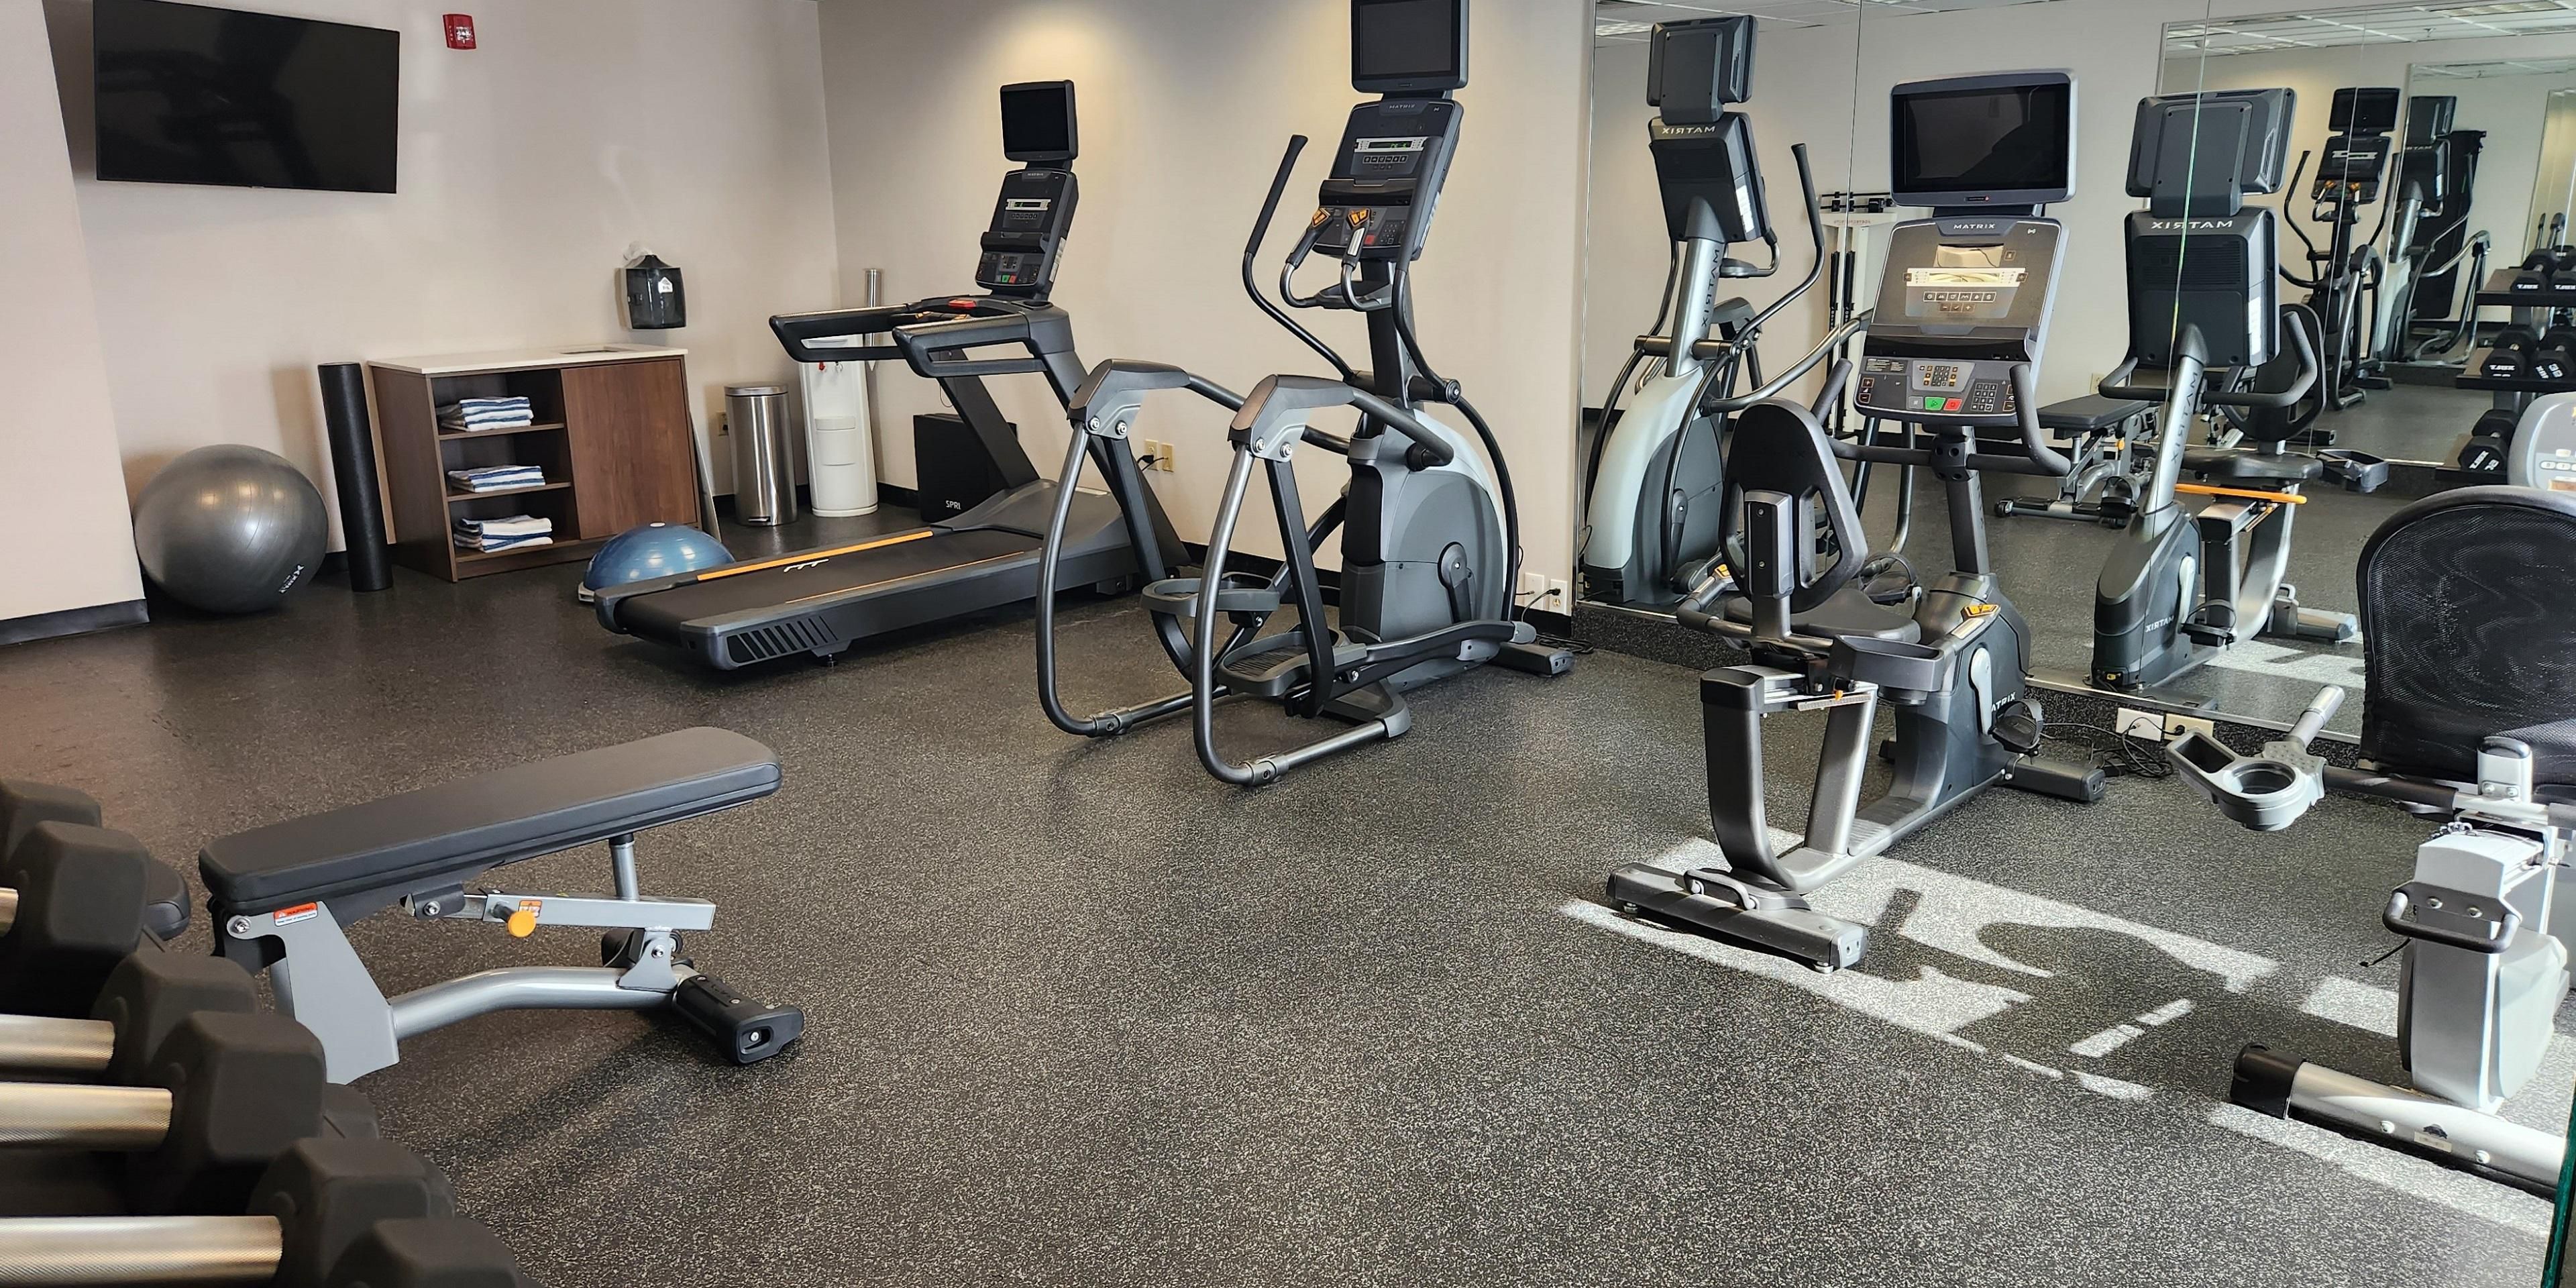 If your daily routine includes a workout, we've got you covered. Our 24-hour Fitness Center features free weights, resistance bands, exercise ball, treadmill, elliptical and stationary bike.